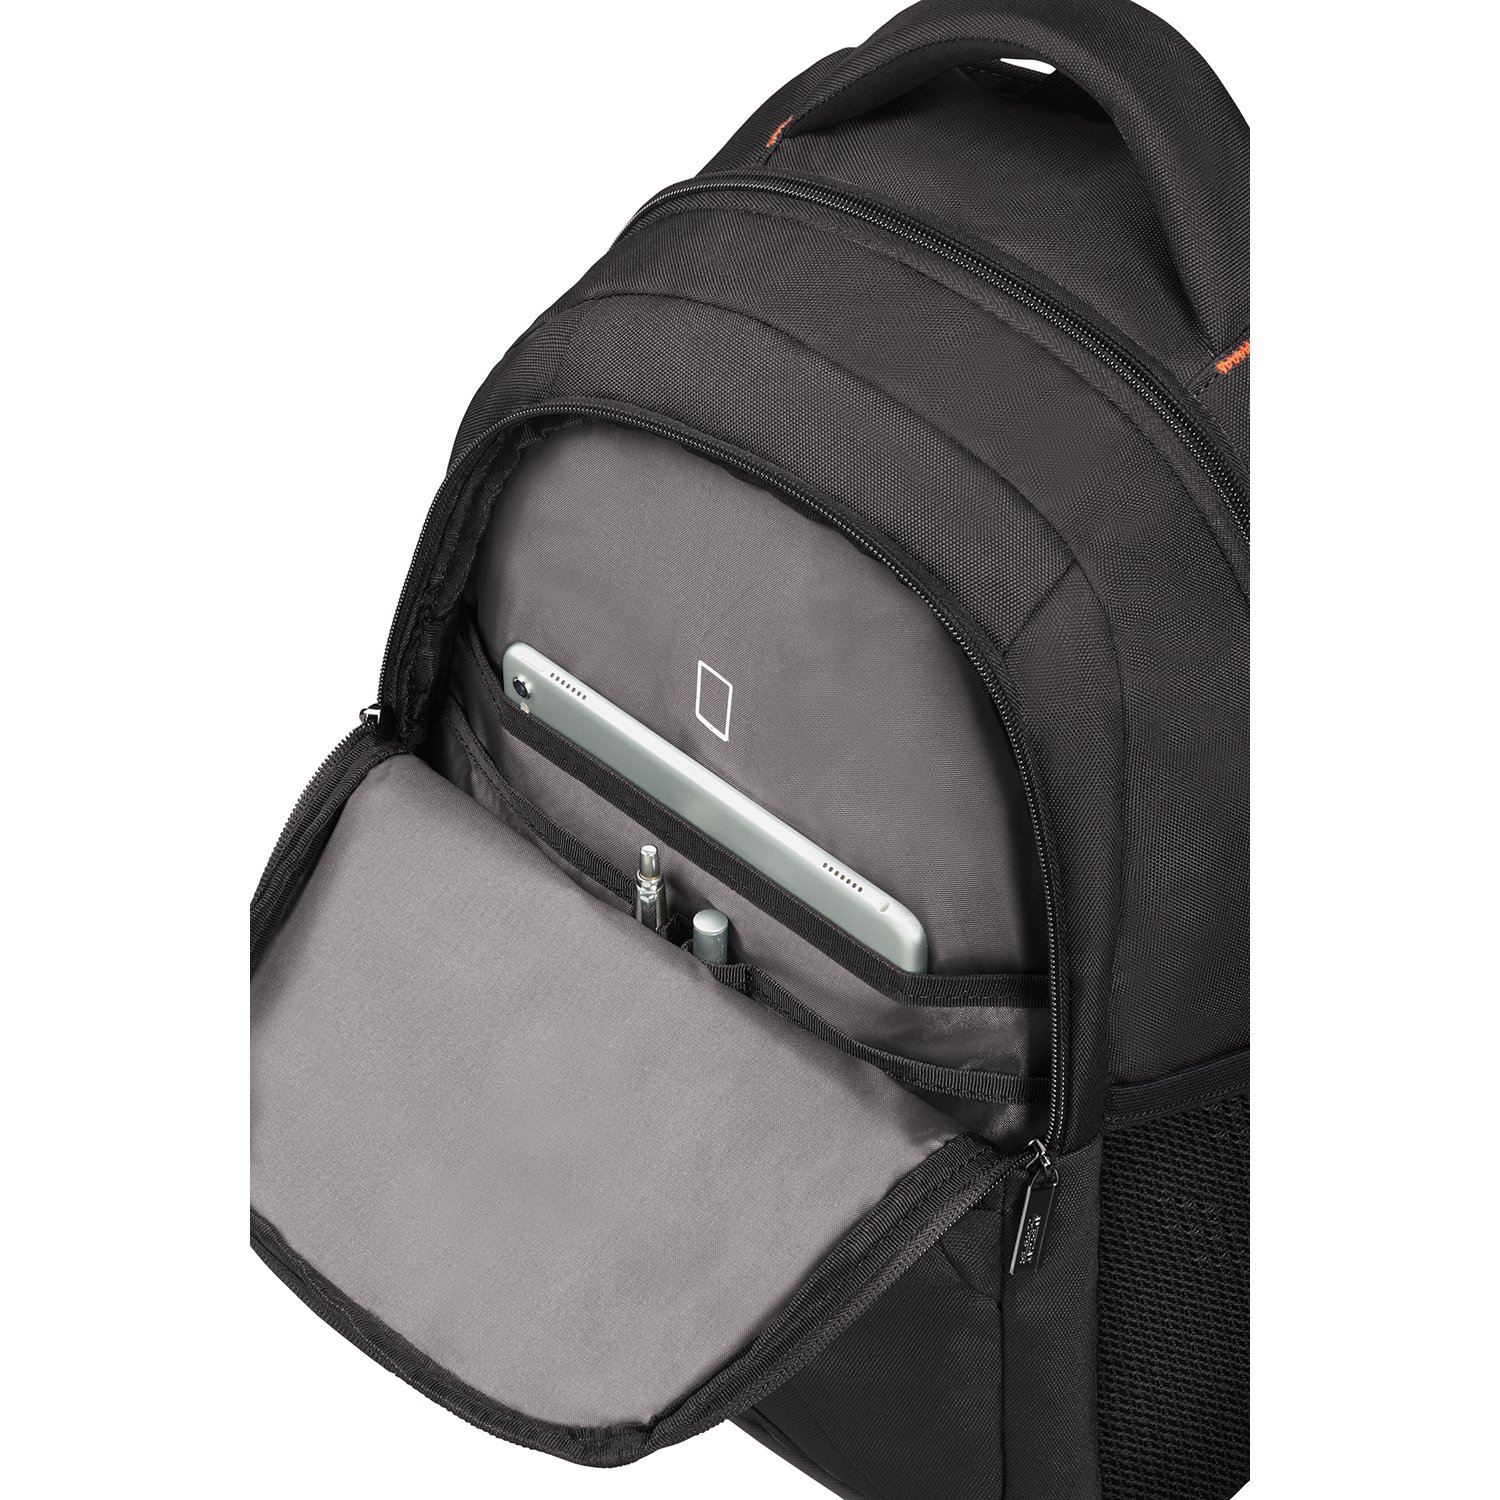 AT WORK-LAPTOP BACKPACK 15.6" S33G-002-SF000*39